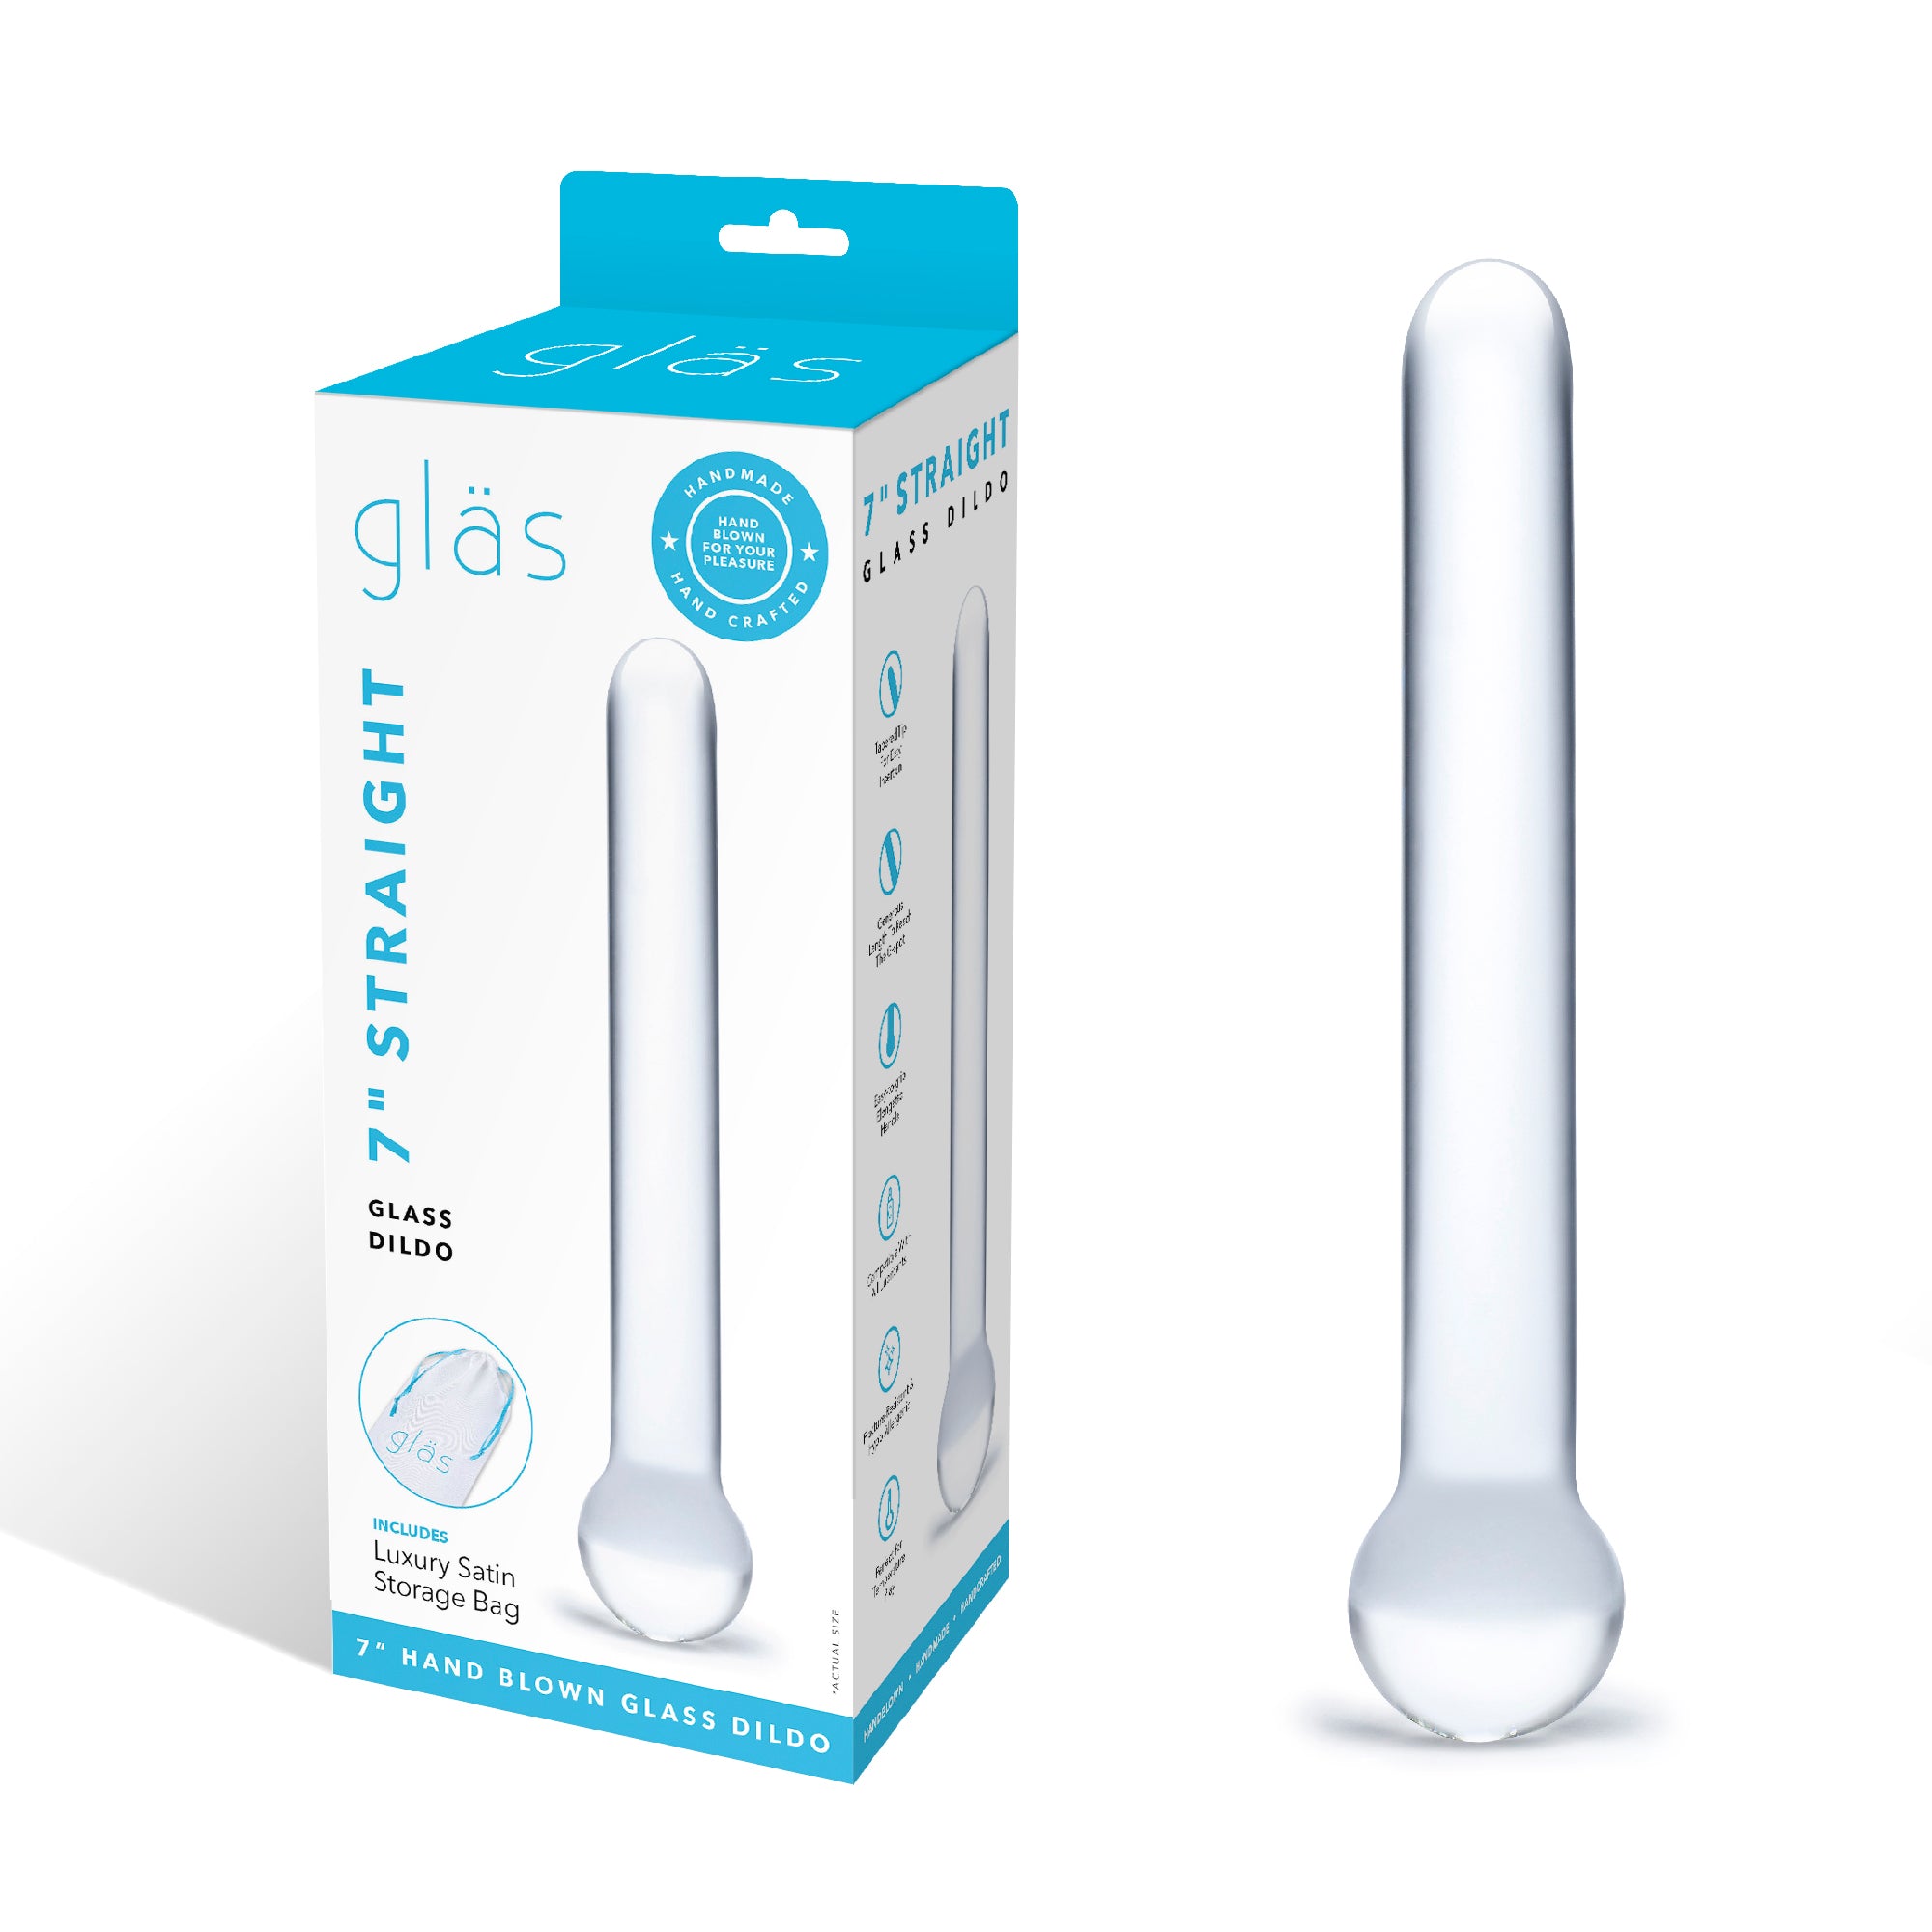 Packaging of the Gläs 7 inch Straight Glass Dildo